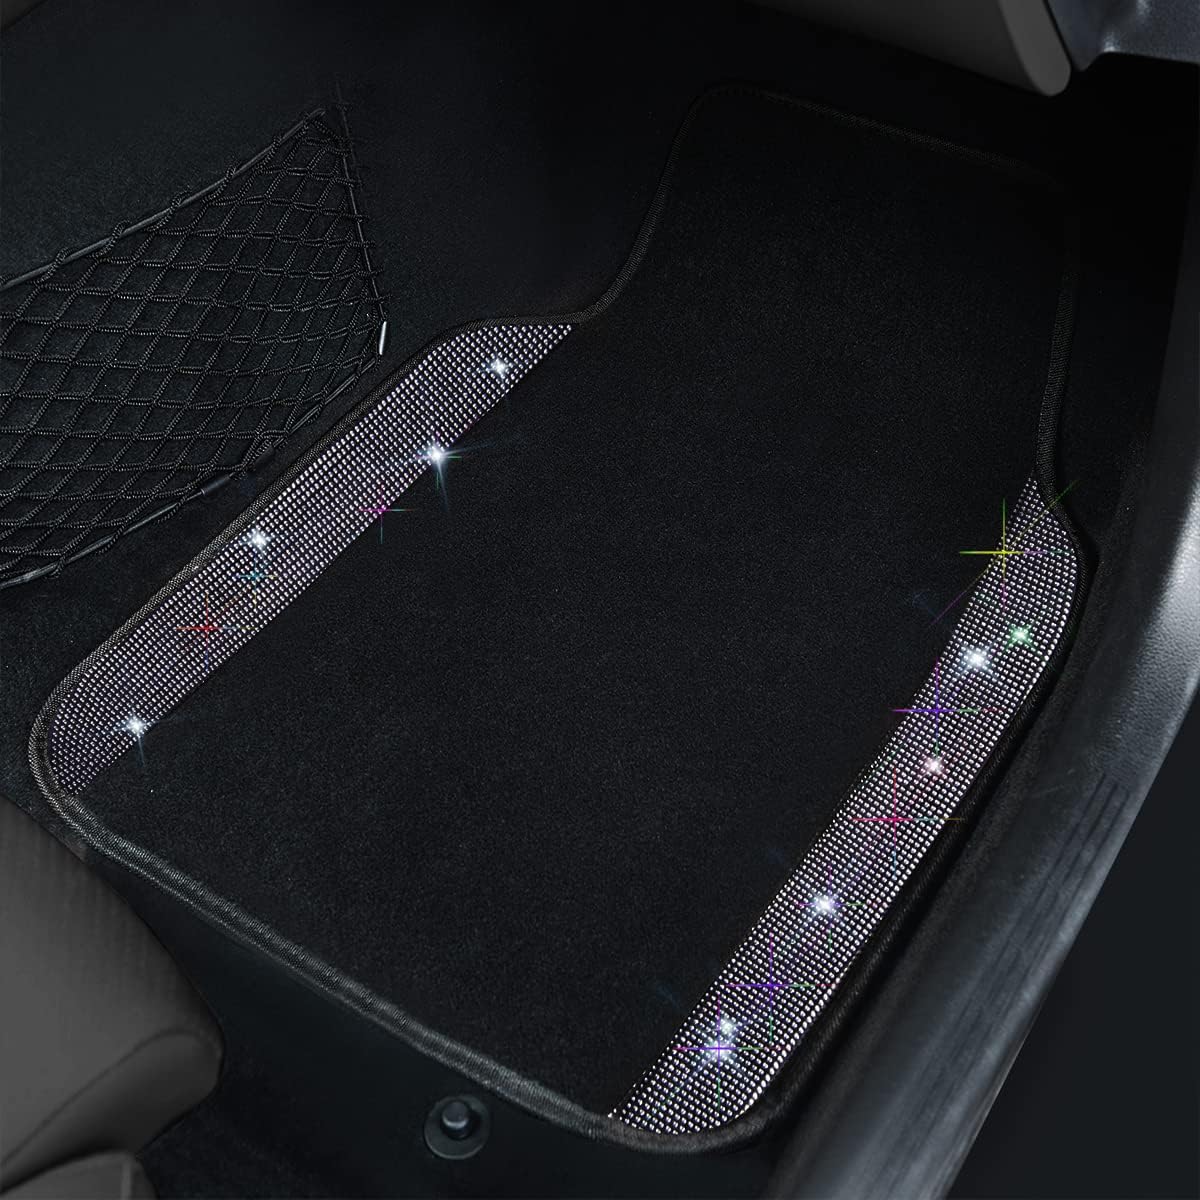 CAR PASS Iridescent Diamond Nappa Calfskin Leather Cushioned,Bling Seat Covers & Steering Cover & Car Floor Mats Universal Fit for Auto SUV Sedan,Sparkly Glitter Shining Rhinestone, Silver